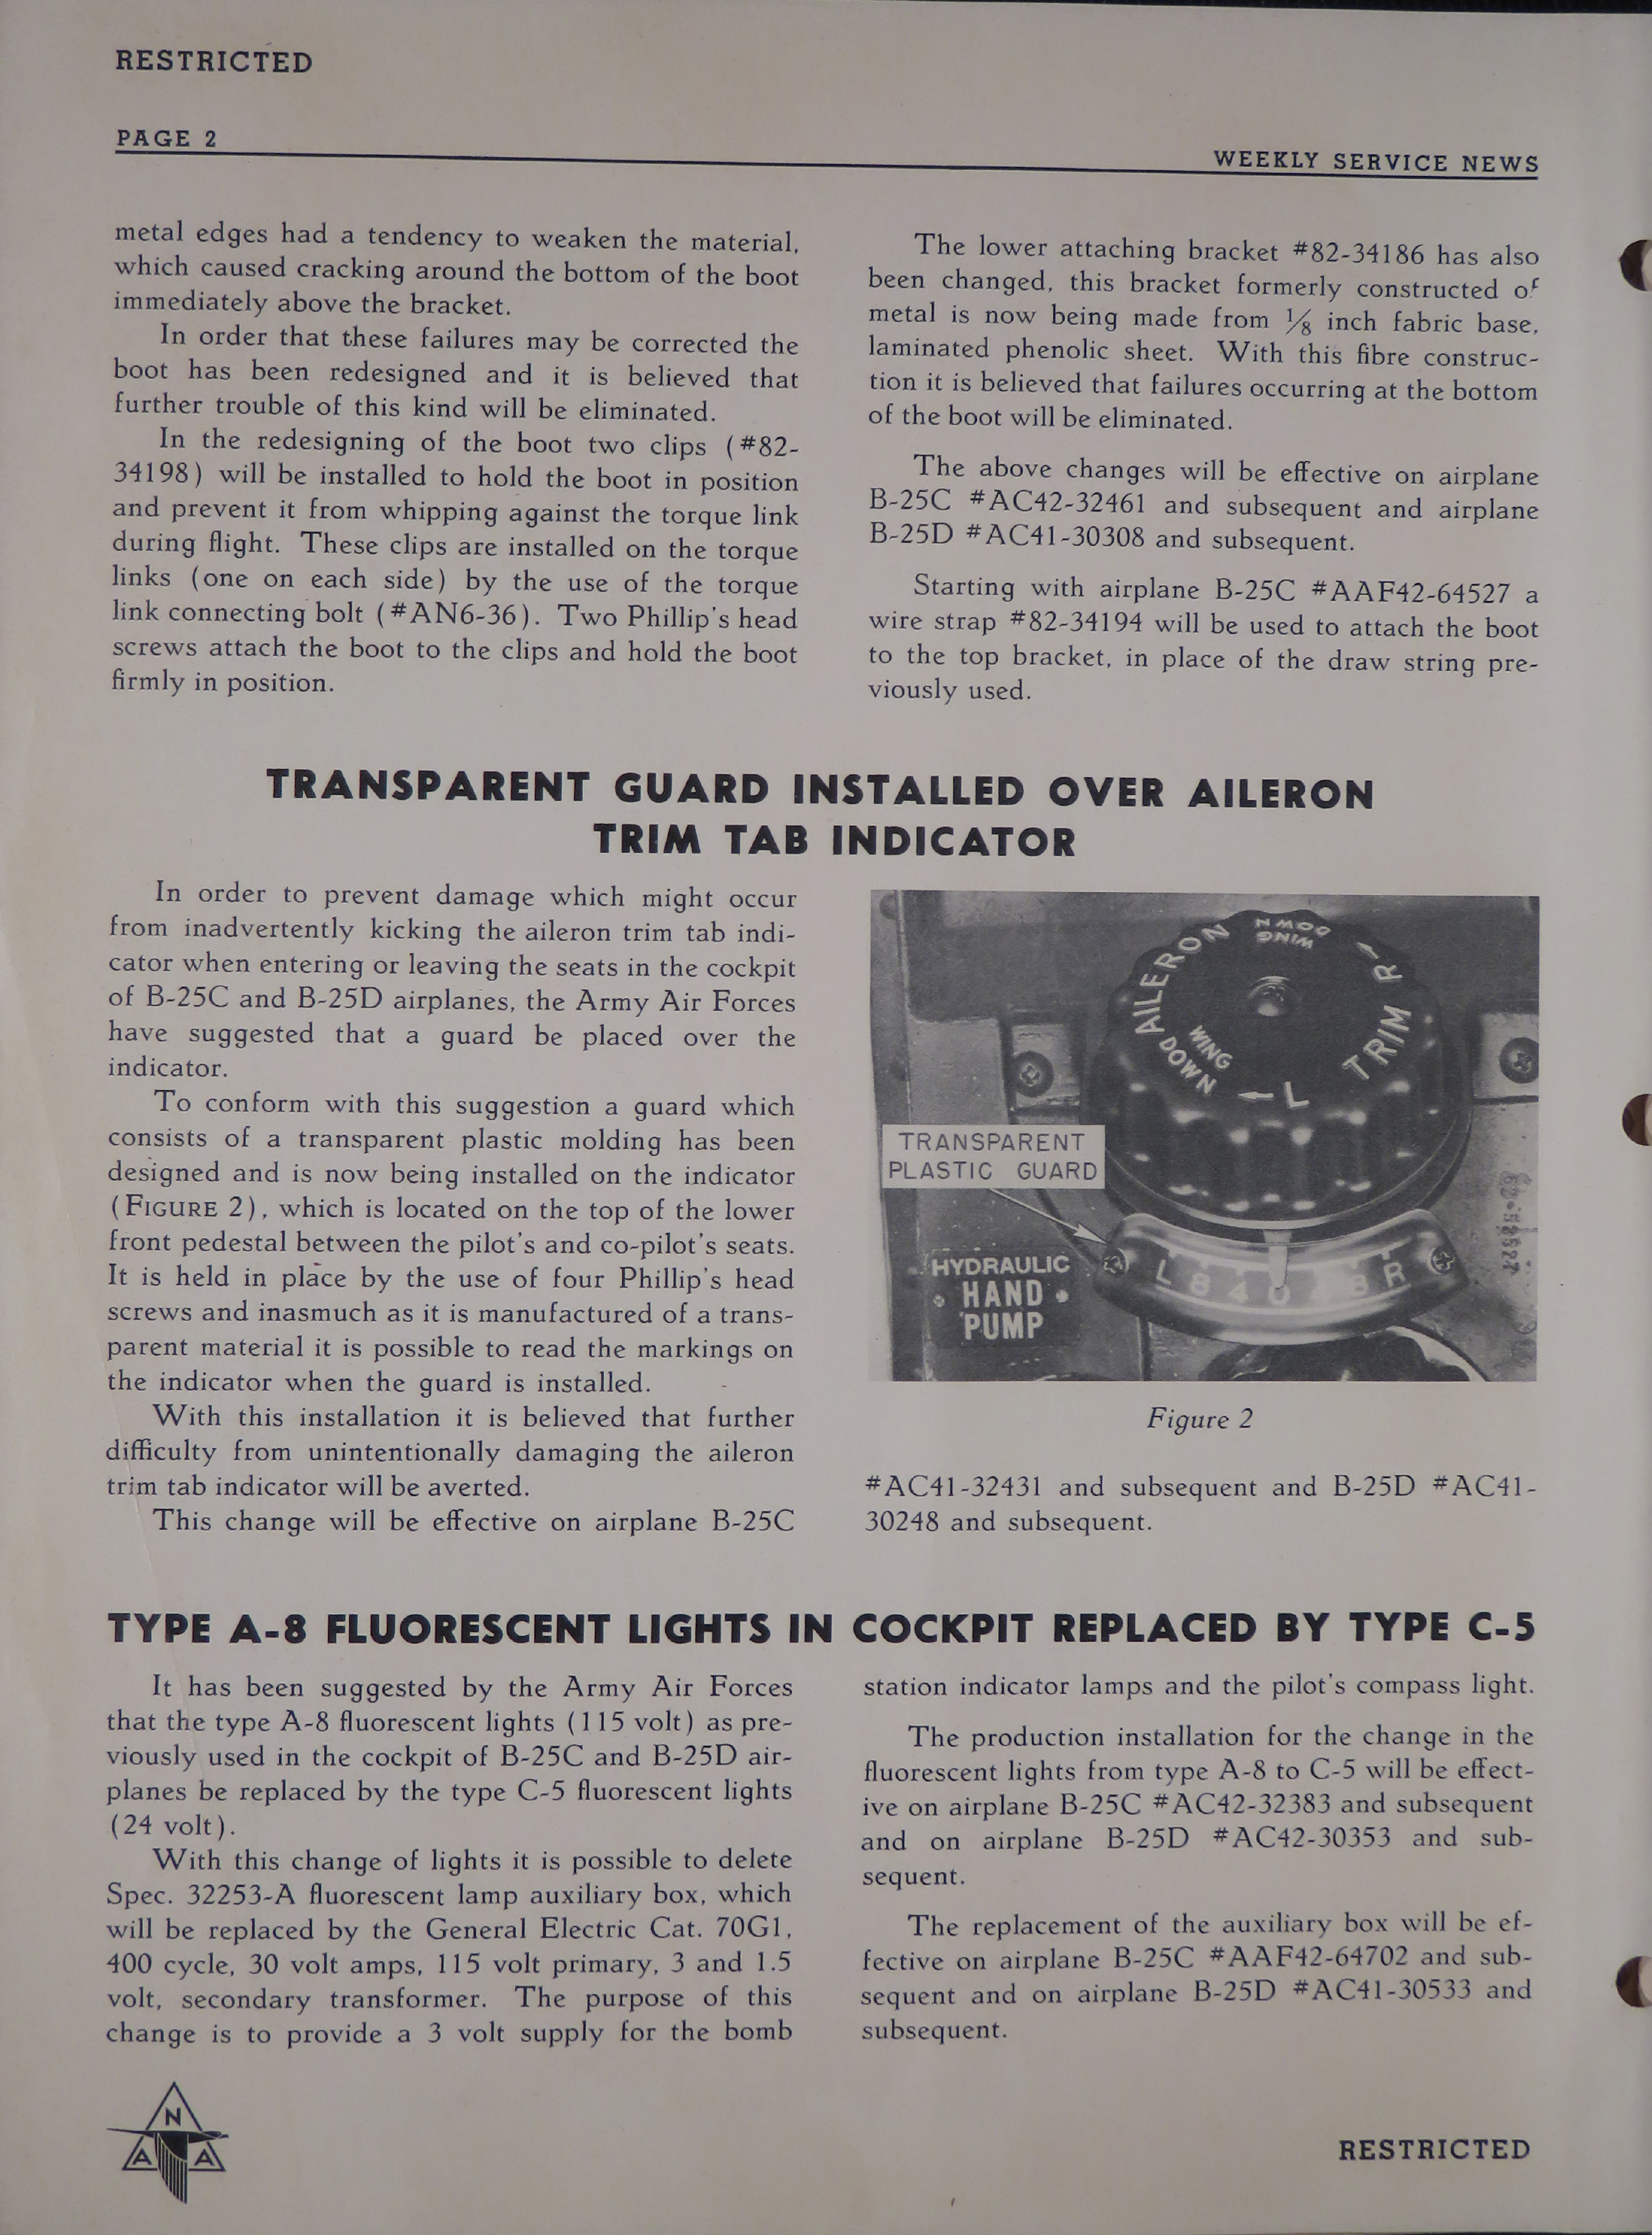 Sample page 2 from AirCorps Library document: Volume 1, No. 27 - Weekly Service News